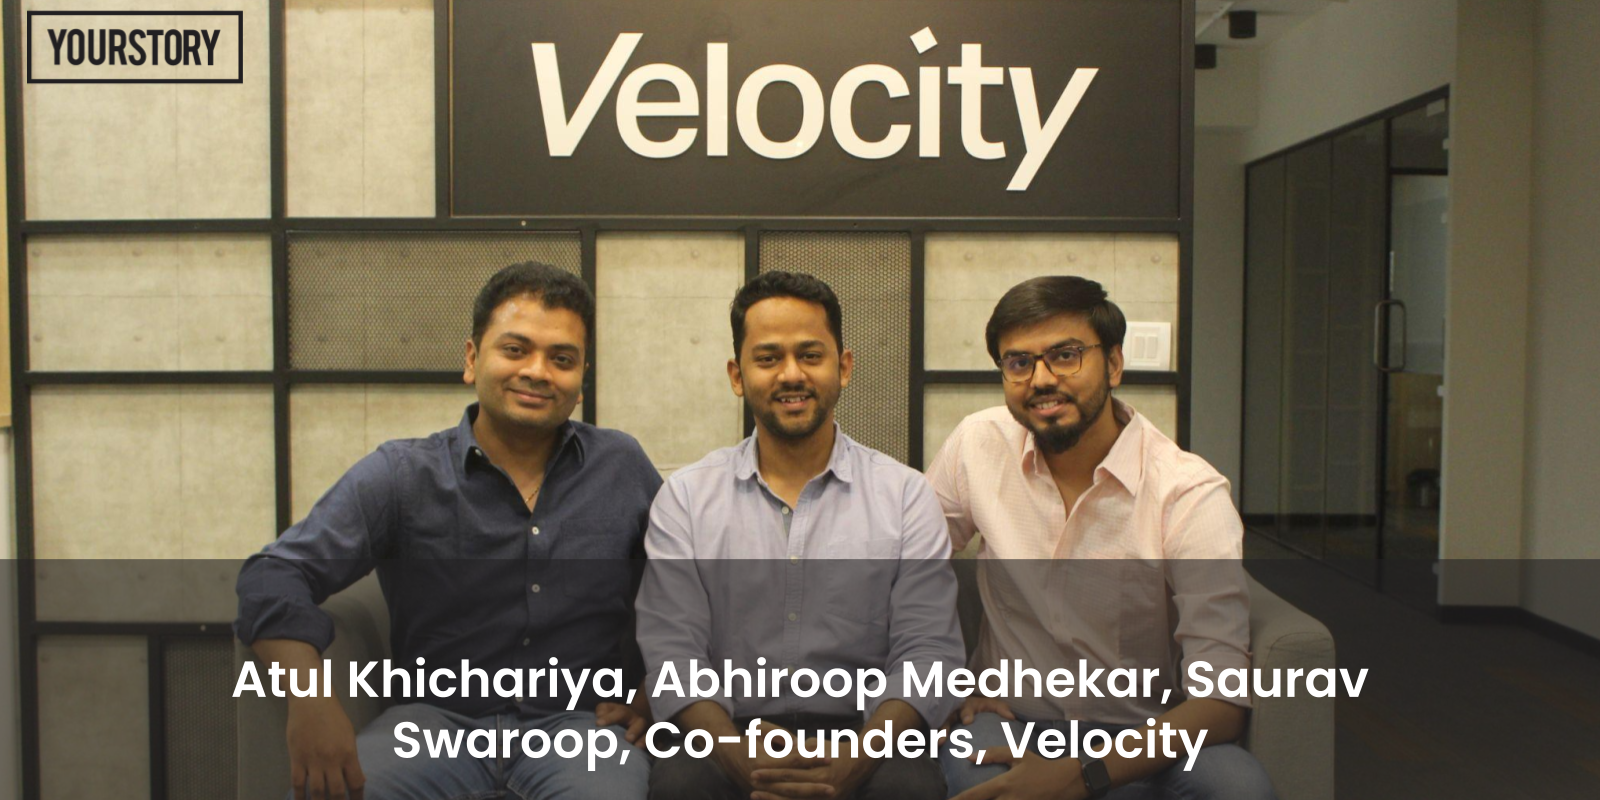 [Funding alert] Fintech startup Velocity raises $20M in Series A round led by Peter Thiel’s Valar Ventures